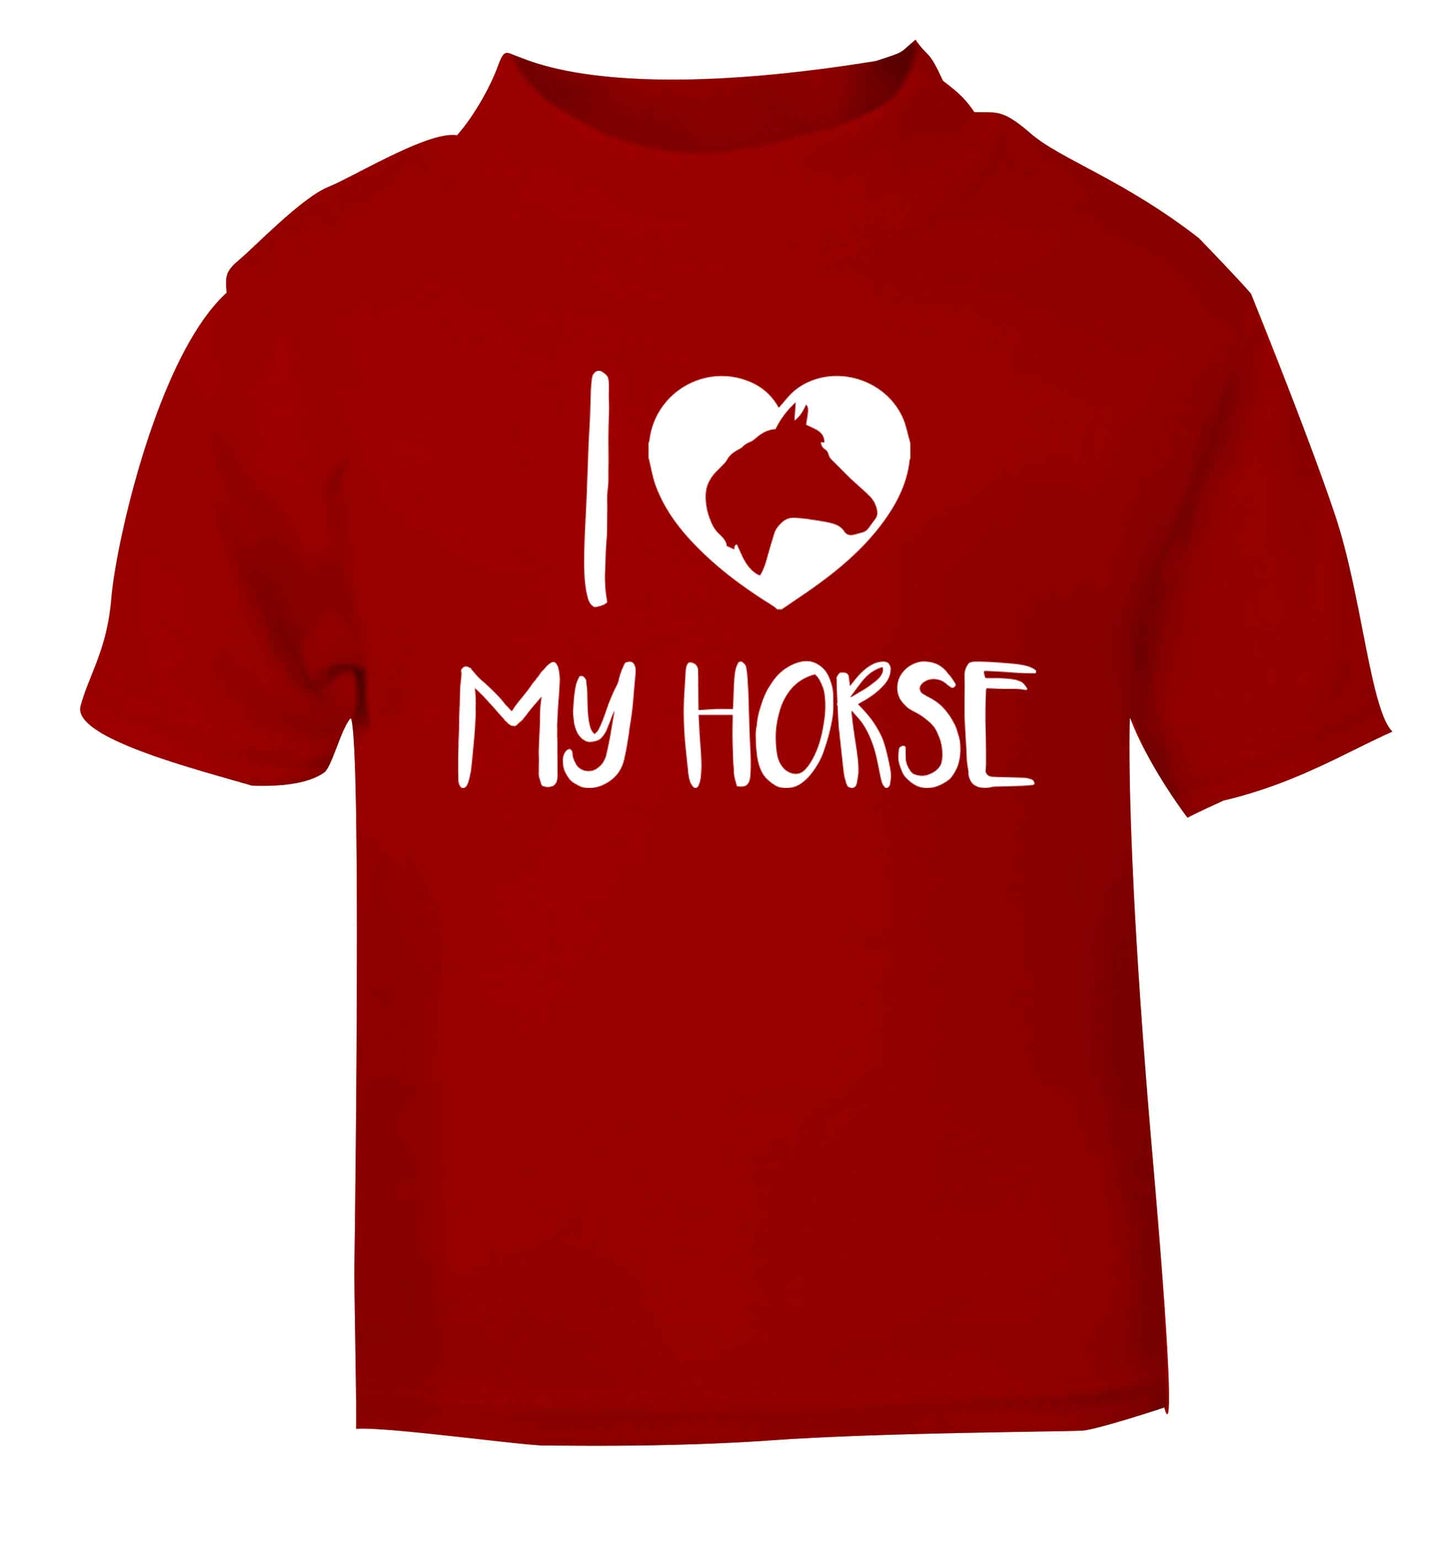 I love my horse red baby toddler Tshirt 2 Years